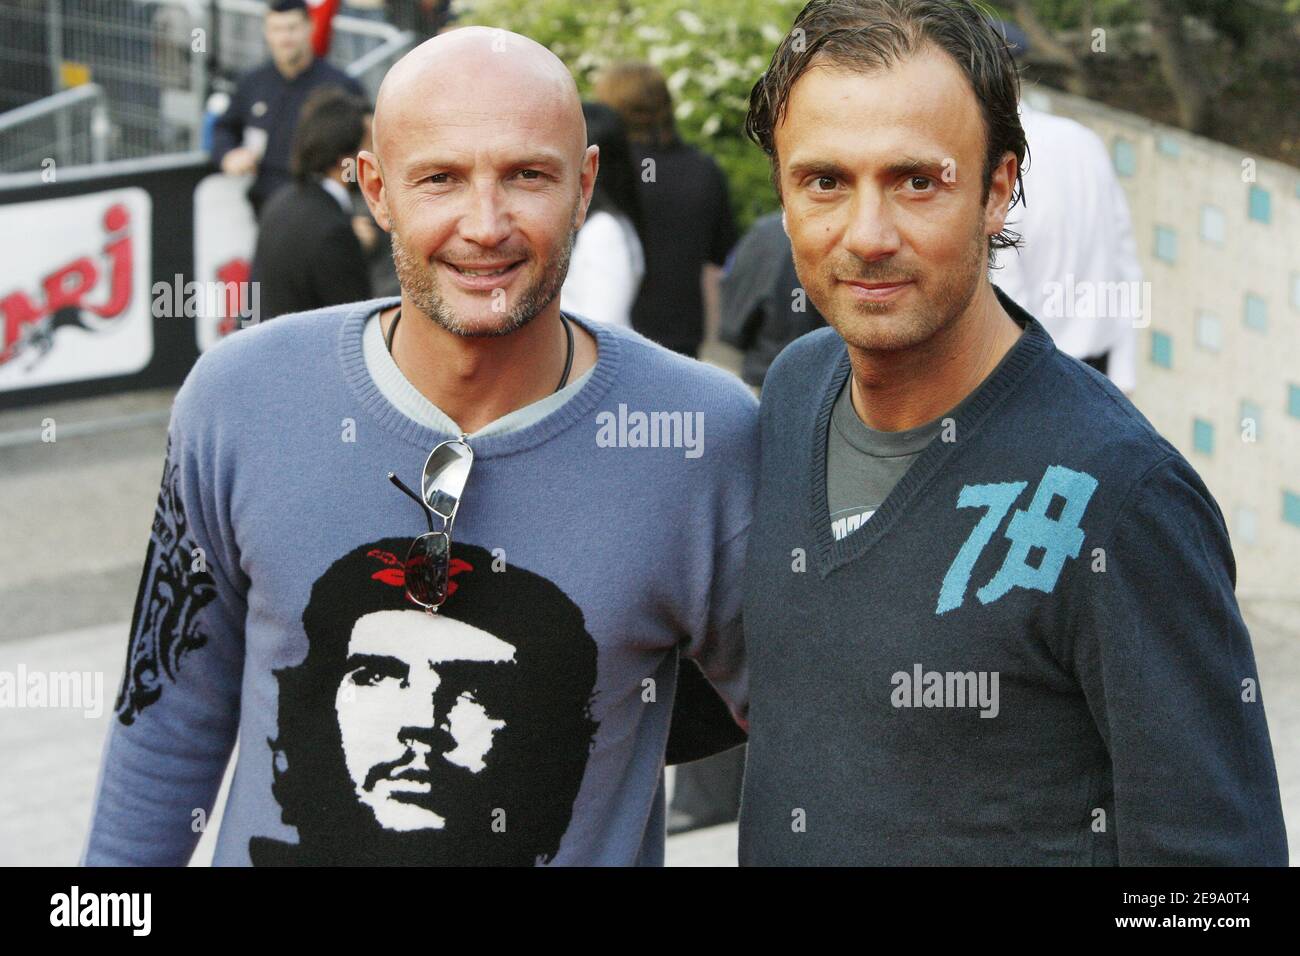 French soccer players Franck Leboeuf (L) and Christophe Dugarry arrive at La Defense, Paris business district on April 26, 2006 to attend the Premiere of his latest movie ' Mission Impossible III'. Photo by Nebinger-Orban/ABACAPRESS.COM Stock Photo